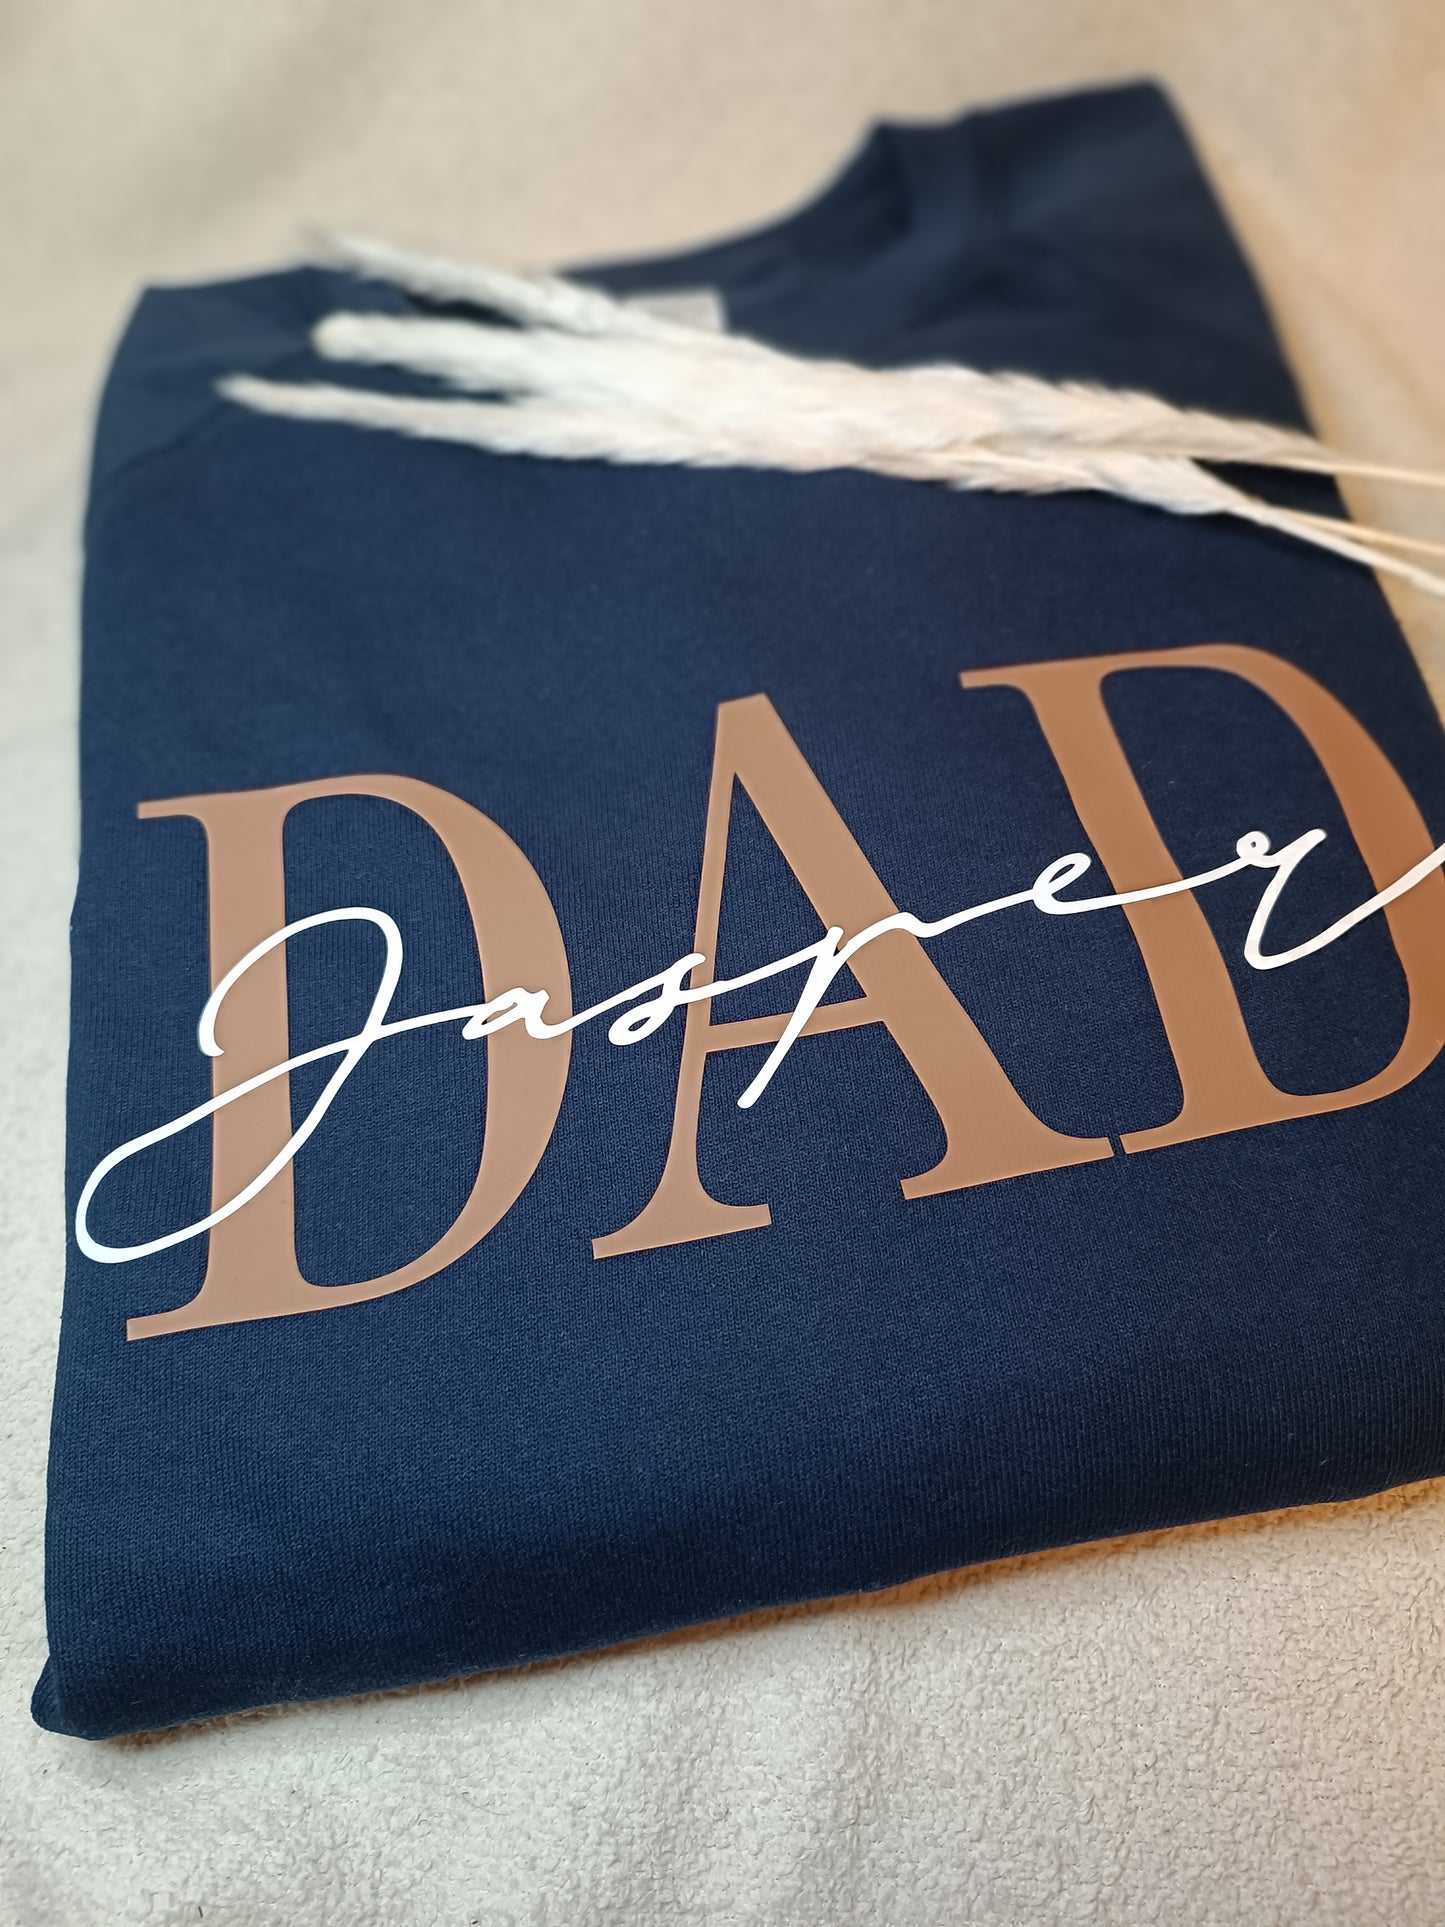 Dad sweater / DAD sweater personalized with children's names